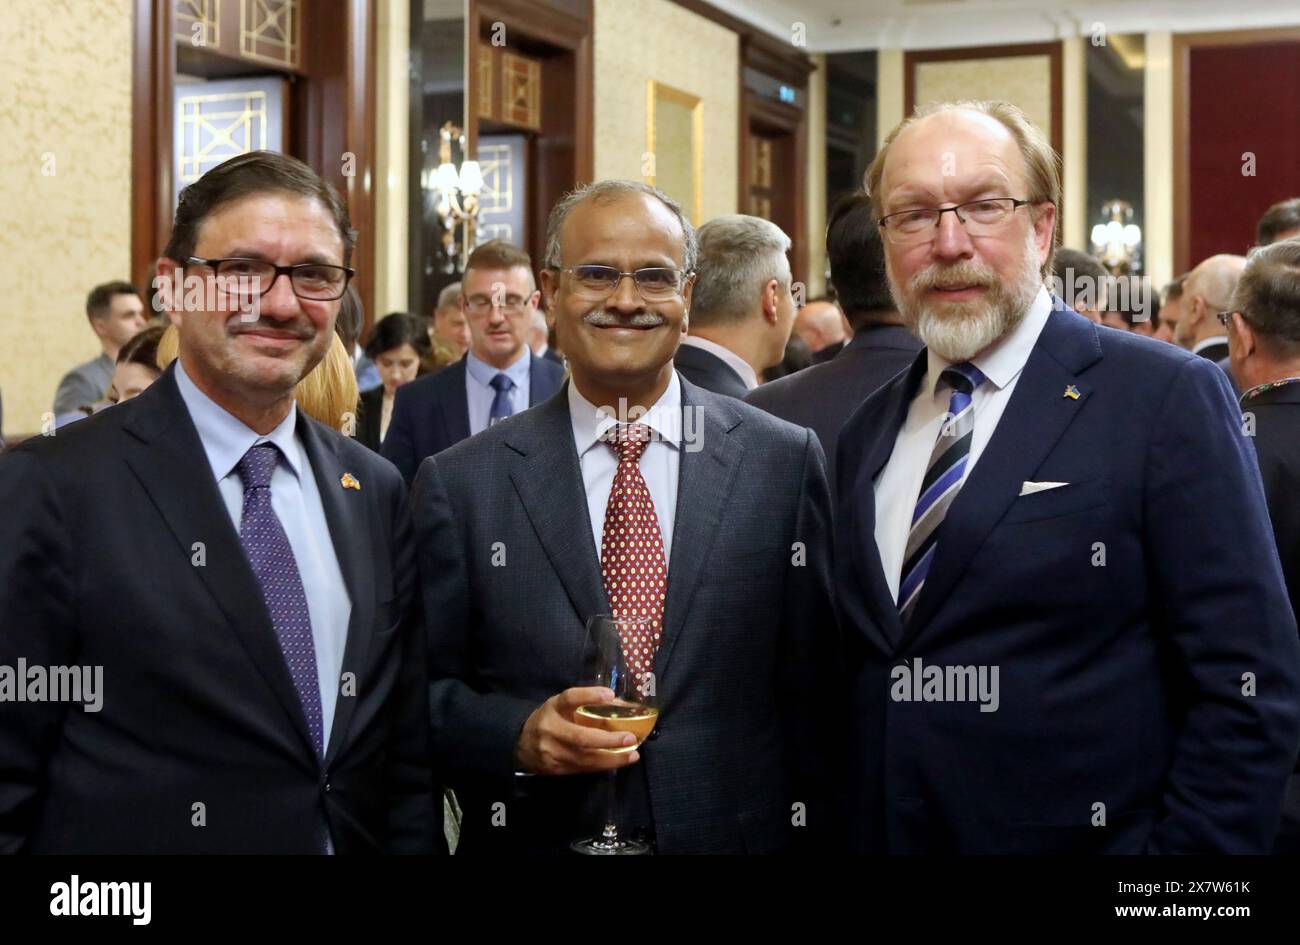 KYIV, UKRAINE - MAY 20, 2024 - Ambassador Extraordinary and Plenipotentiary of the Kingdom of Spain to Ukraine Ricardo Lopez-Aranda Jagu, Ambassador Extraordinary and Plenipotentiary of the Republic of India to Ukraine Harsh Kumar Jain and President of the Ukrainian Chamber of Commerce and Industry Gennadiy Chyzhykov (L to R) attend the reception to honour heroism and freedom held by the Israeli Embassy to celebrate the 76th anniversary of the establishment of the State of Israel, Kyiv, capital of Ukraine. Stock Photo